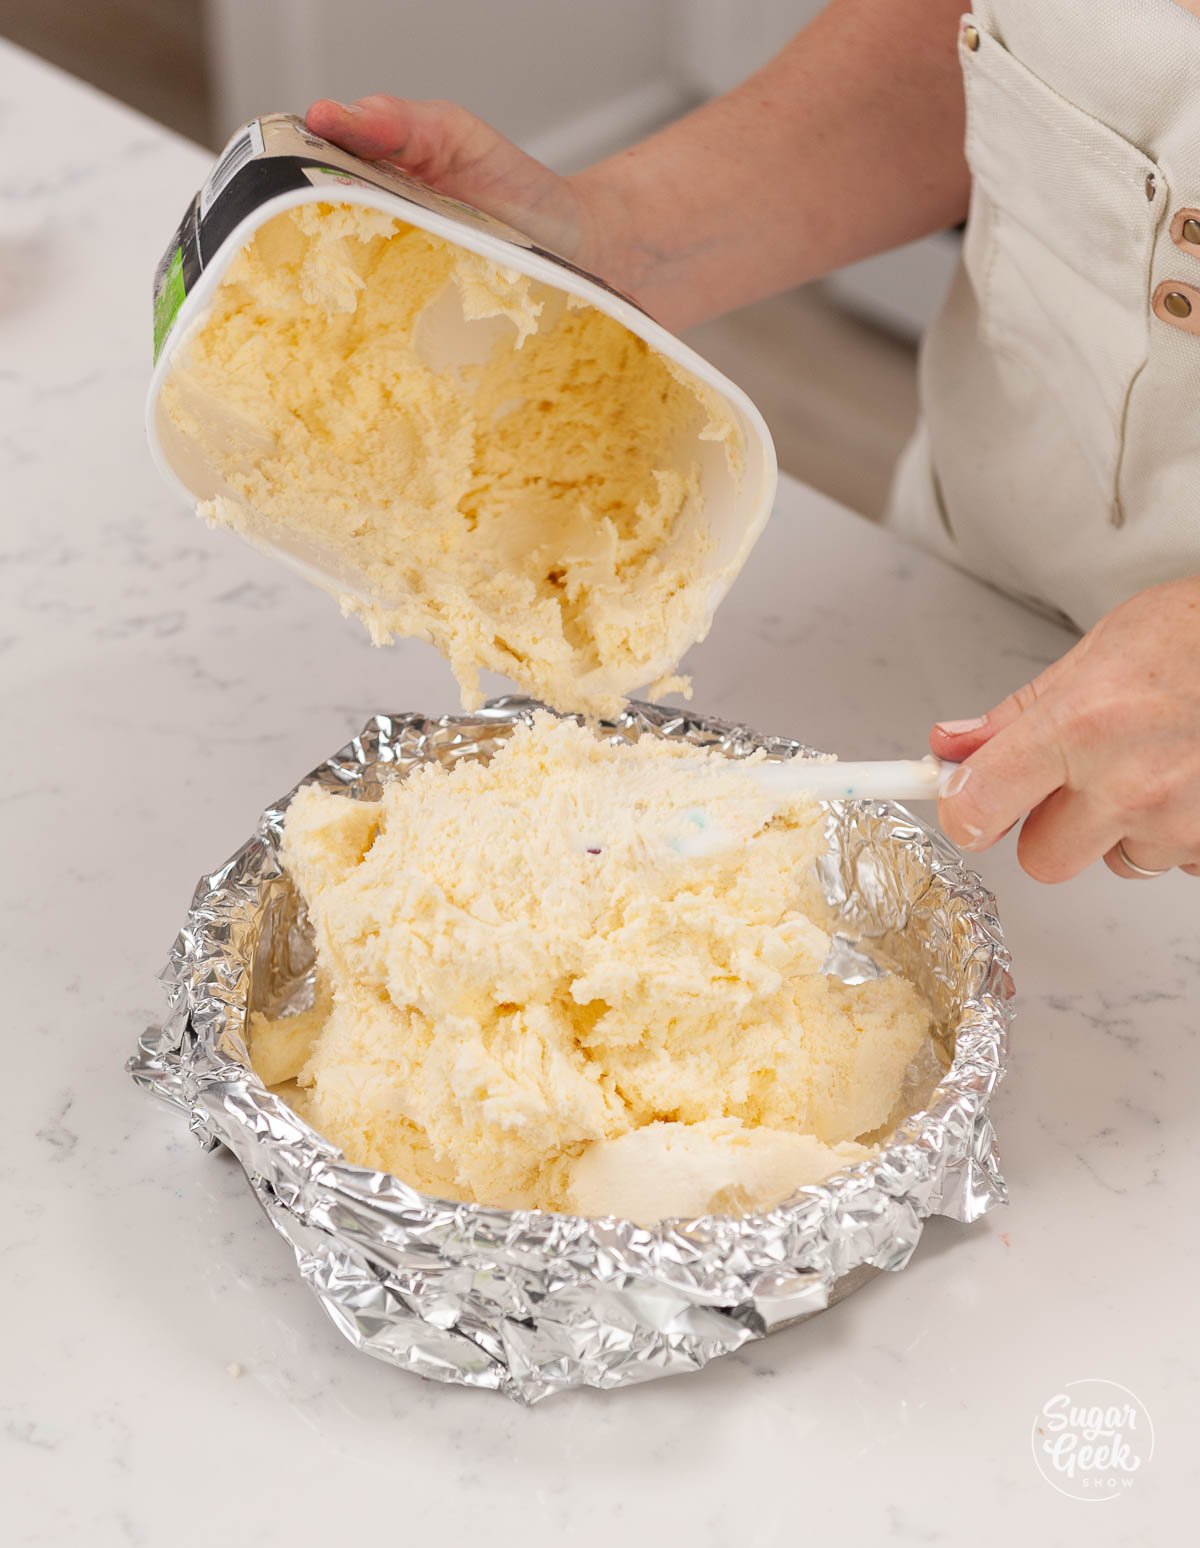 placing softened ice cream into an aluminum foil lined cake pan